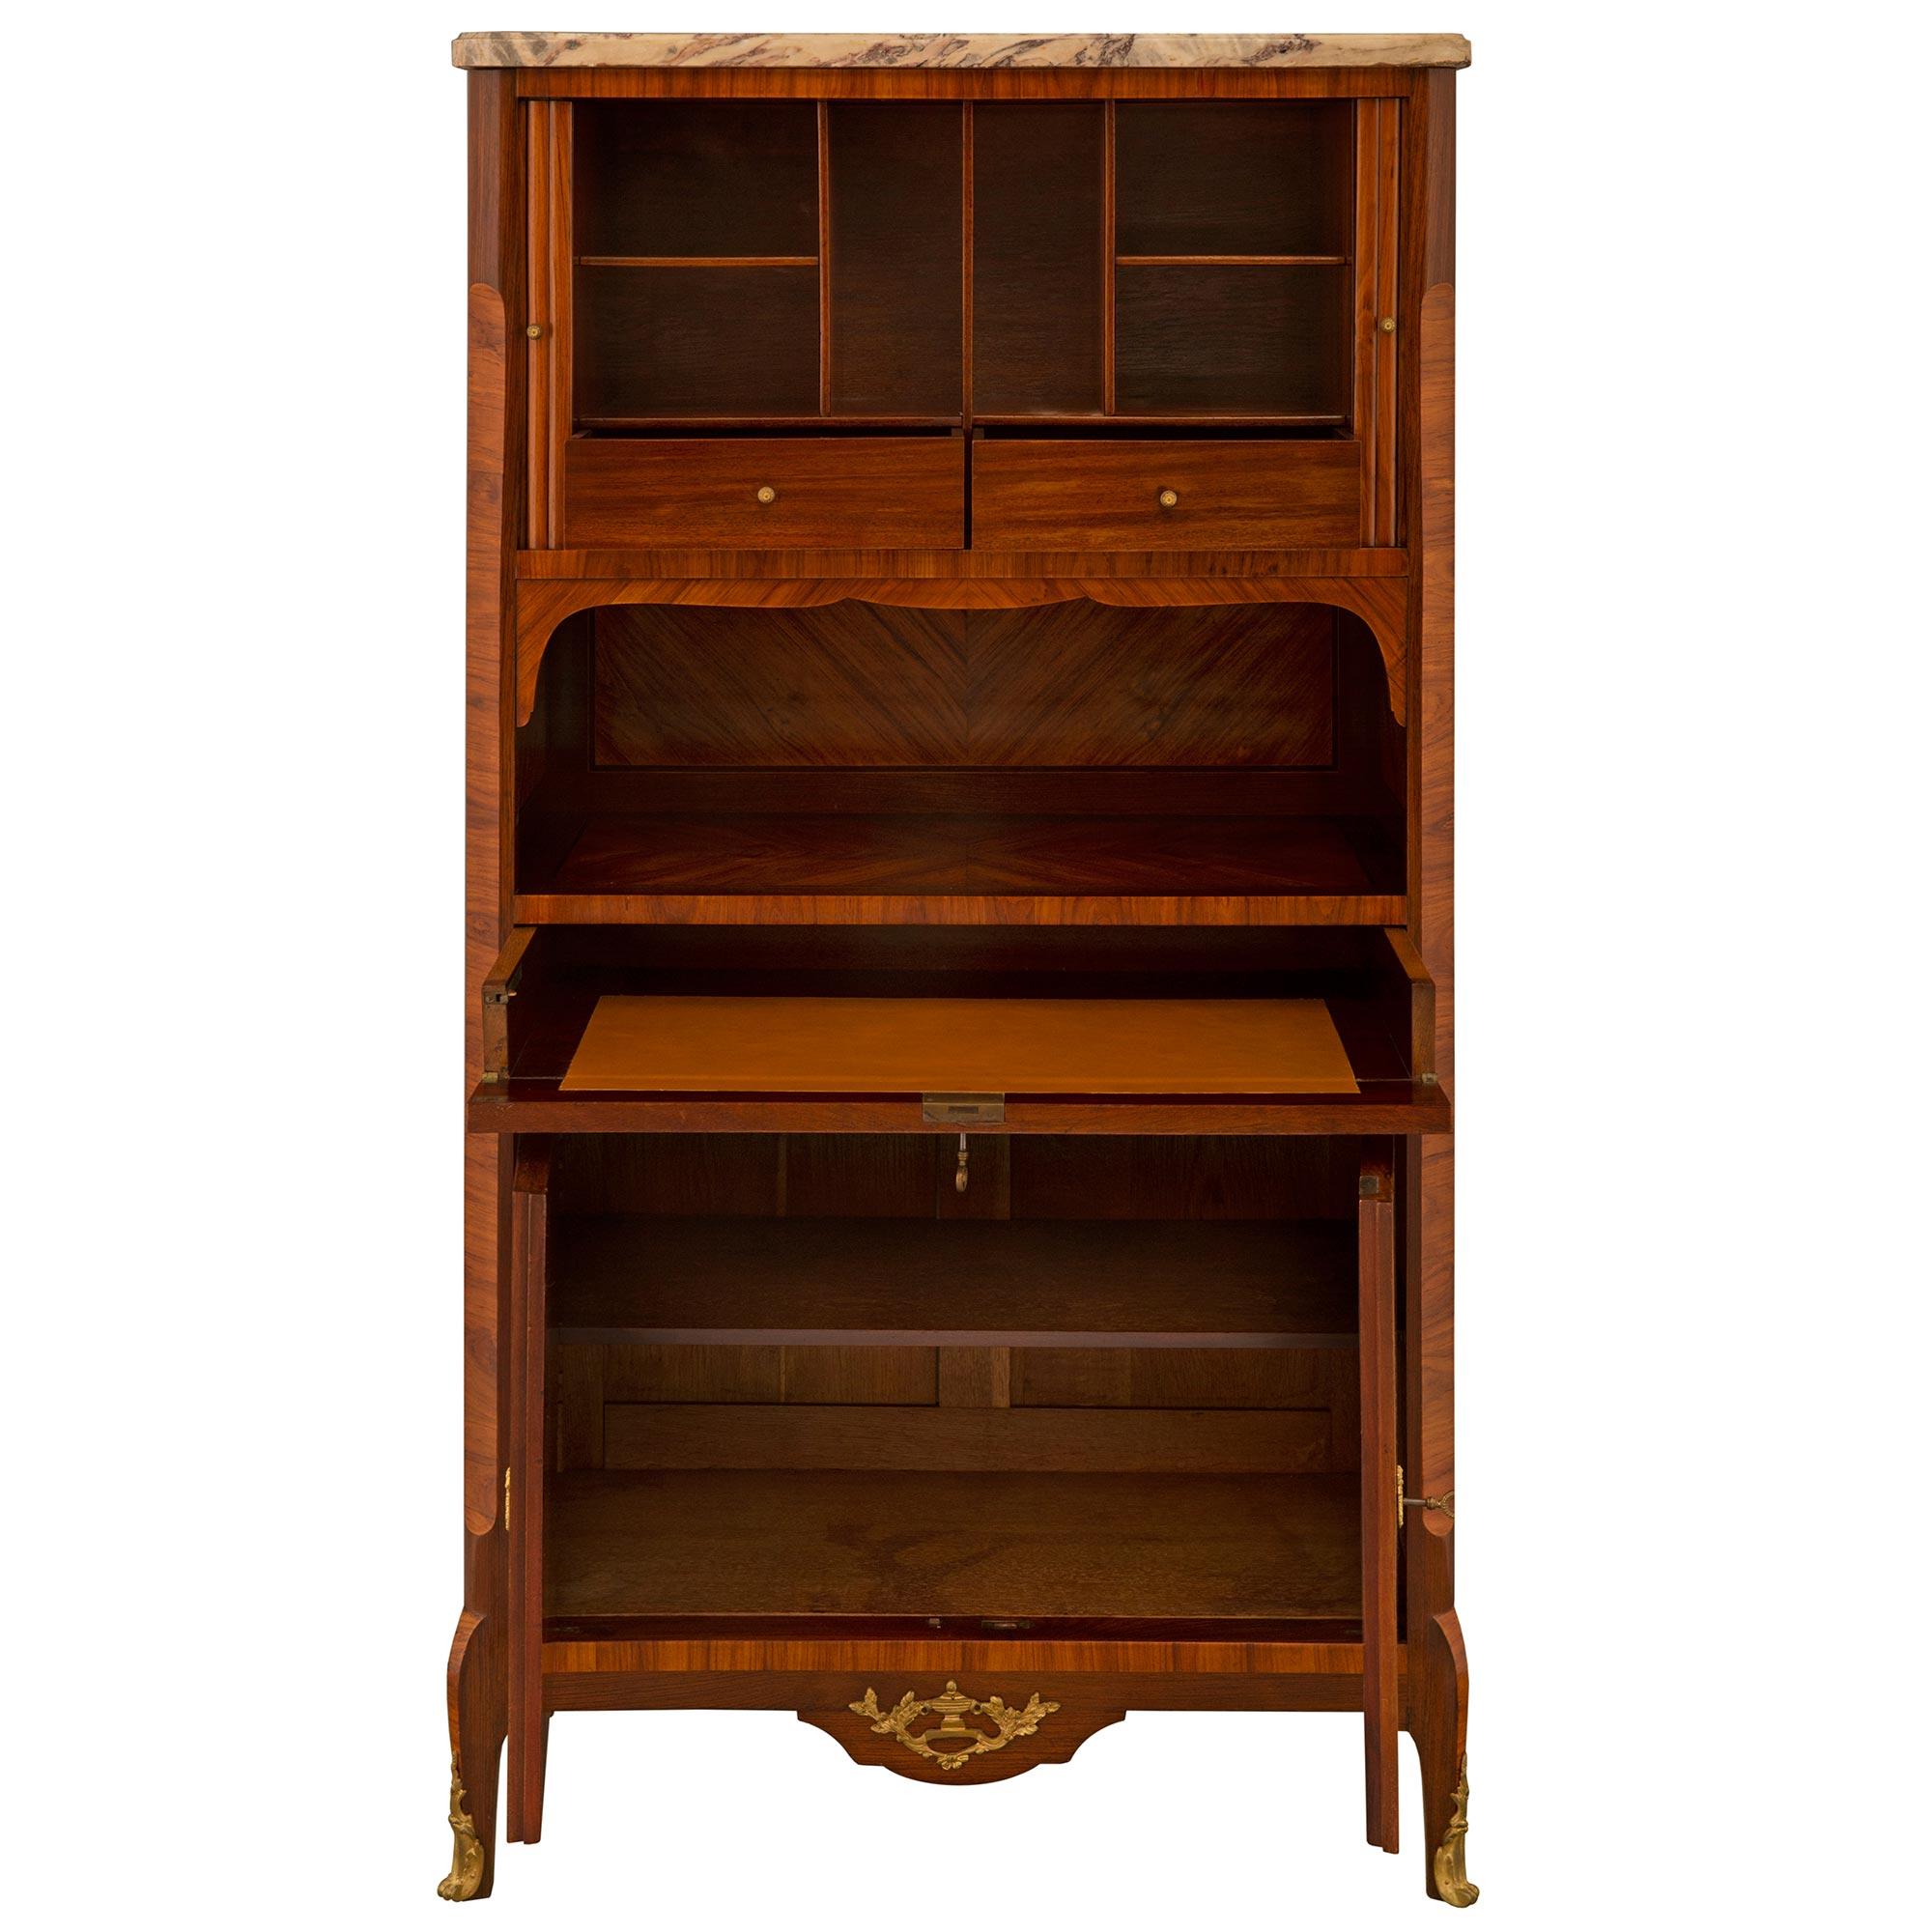 A fine 19th century French transitional cabinet/ secretaire. The whole is raised on cabriole legs with ormolu sabots below two quarter veneered tulipwood and kingwood doors. Above is a drawer opening up to a writing surface with a brown leather